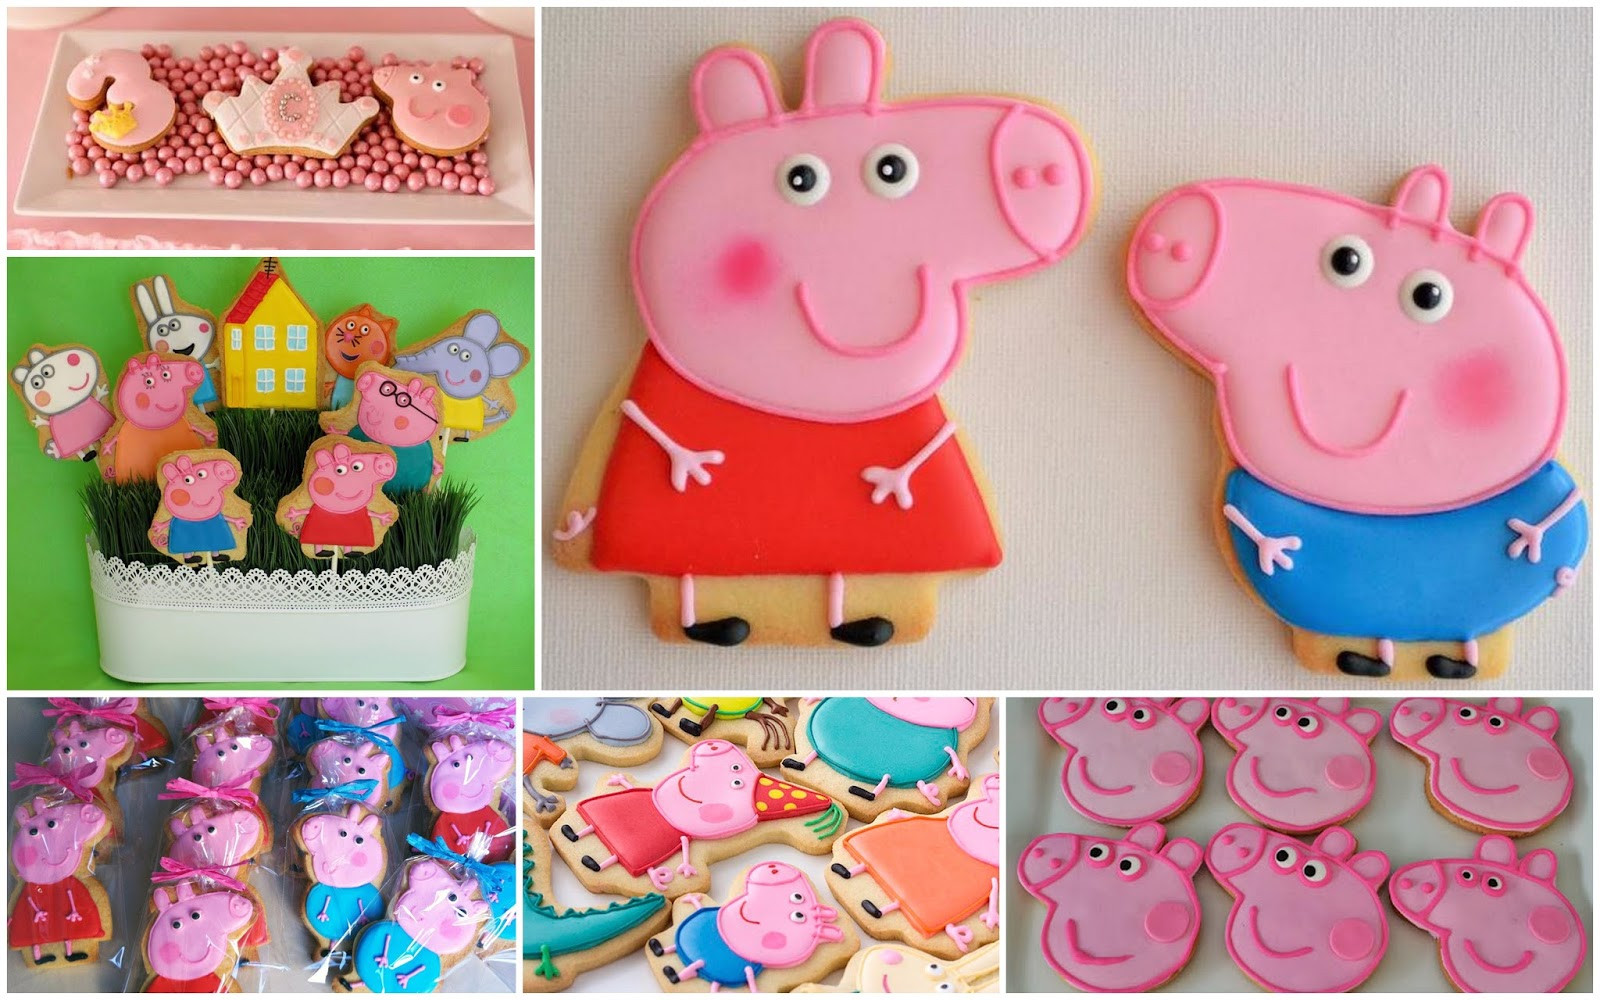 Peppa Pig Birthday Decorations
 Peppa Pig Theme Birthday Party "A" Creative Events